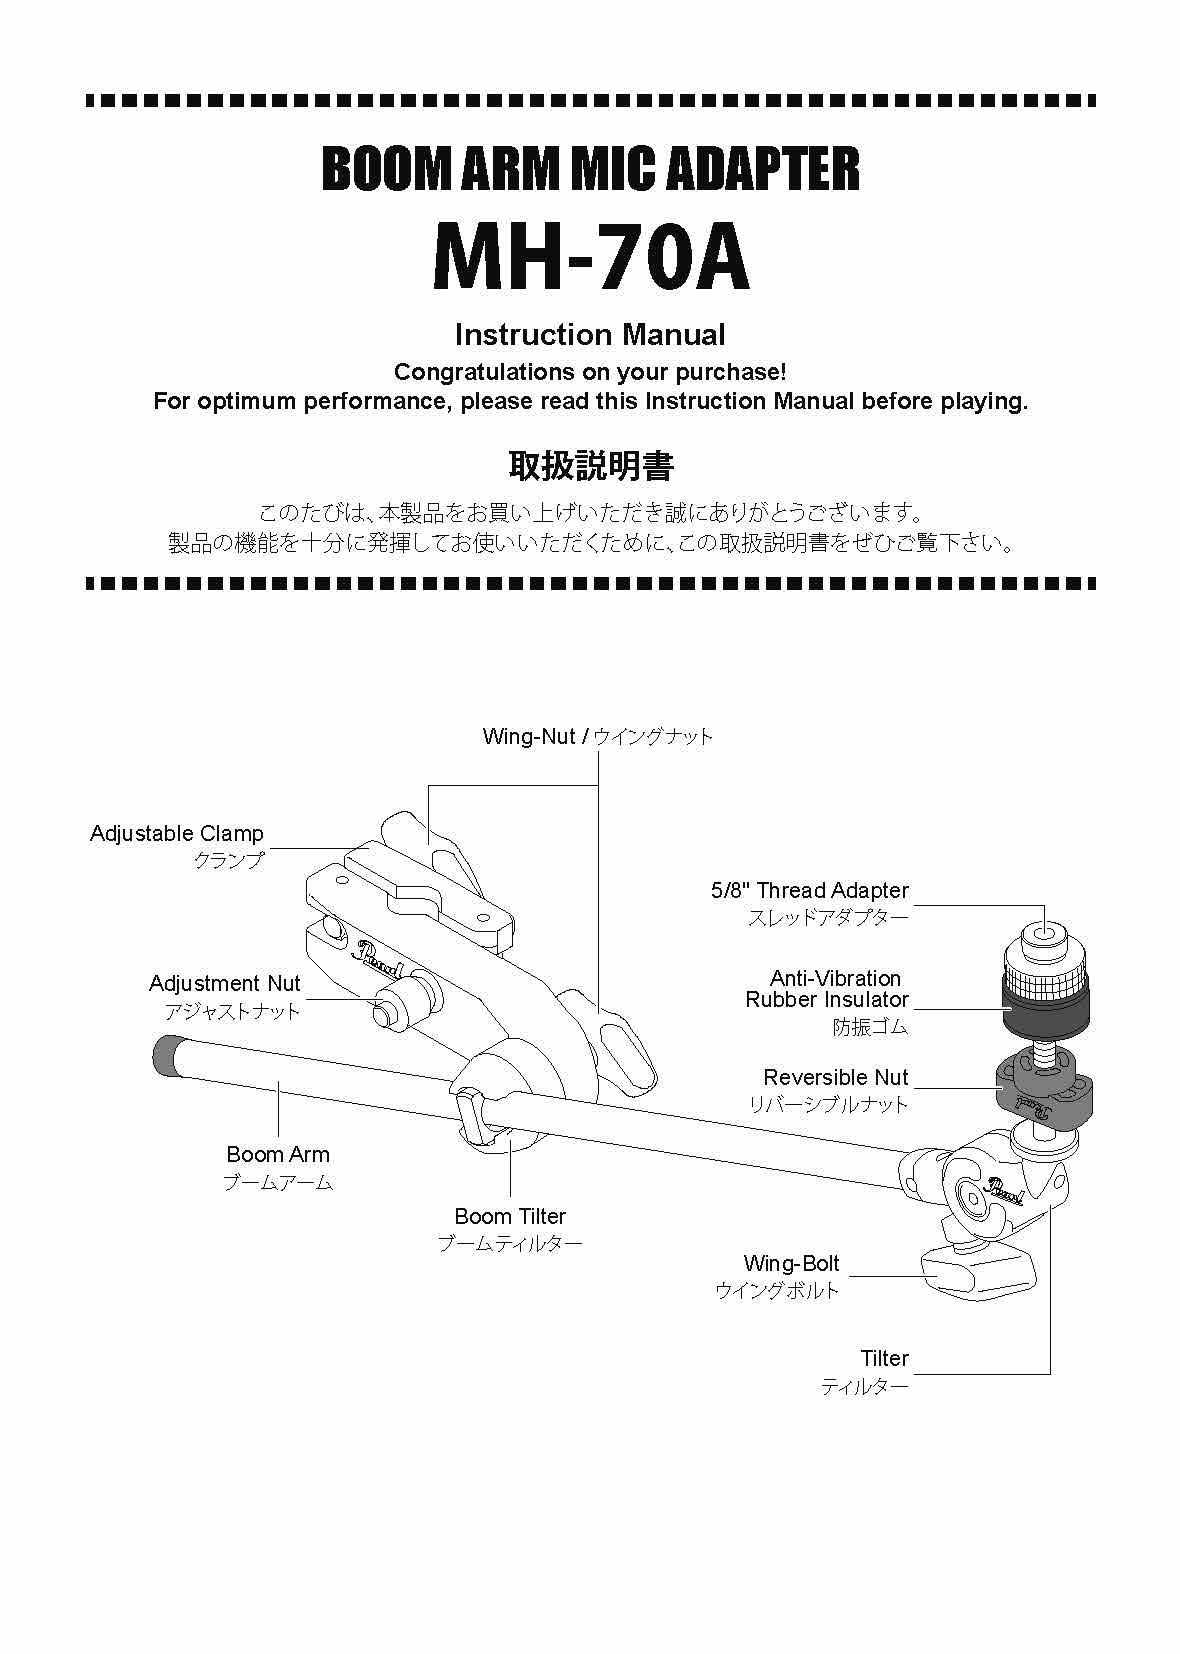 MH-70A BOOM ARM MIC ADAPTER Manual